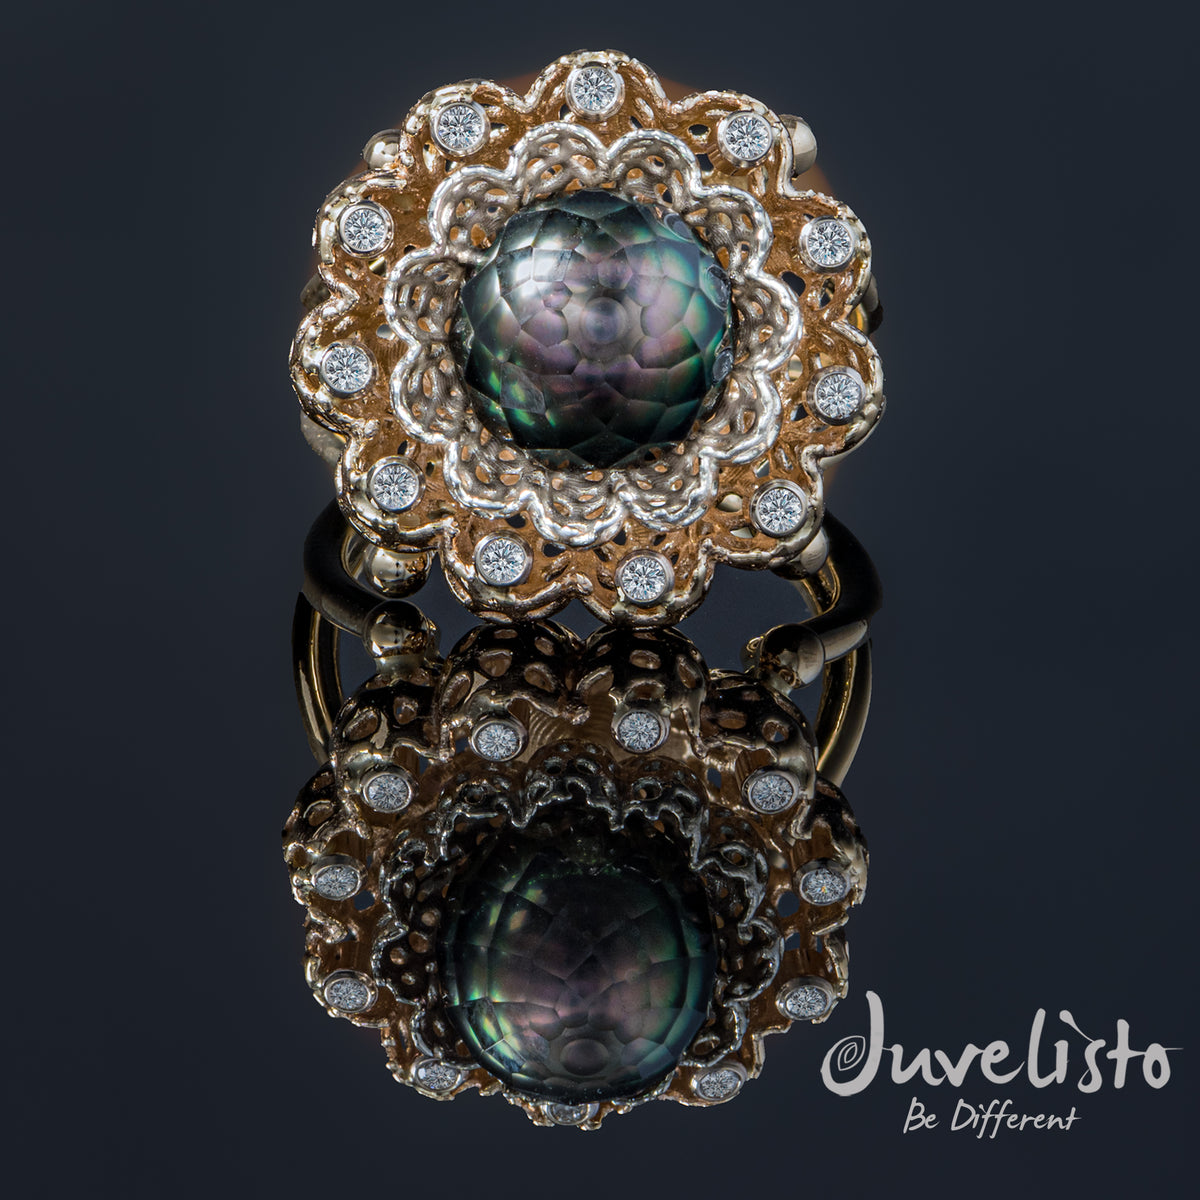 Juvelisto Design  The Sea Anemone Gold Ring with Tahitian Pearl And Diamonds